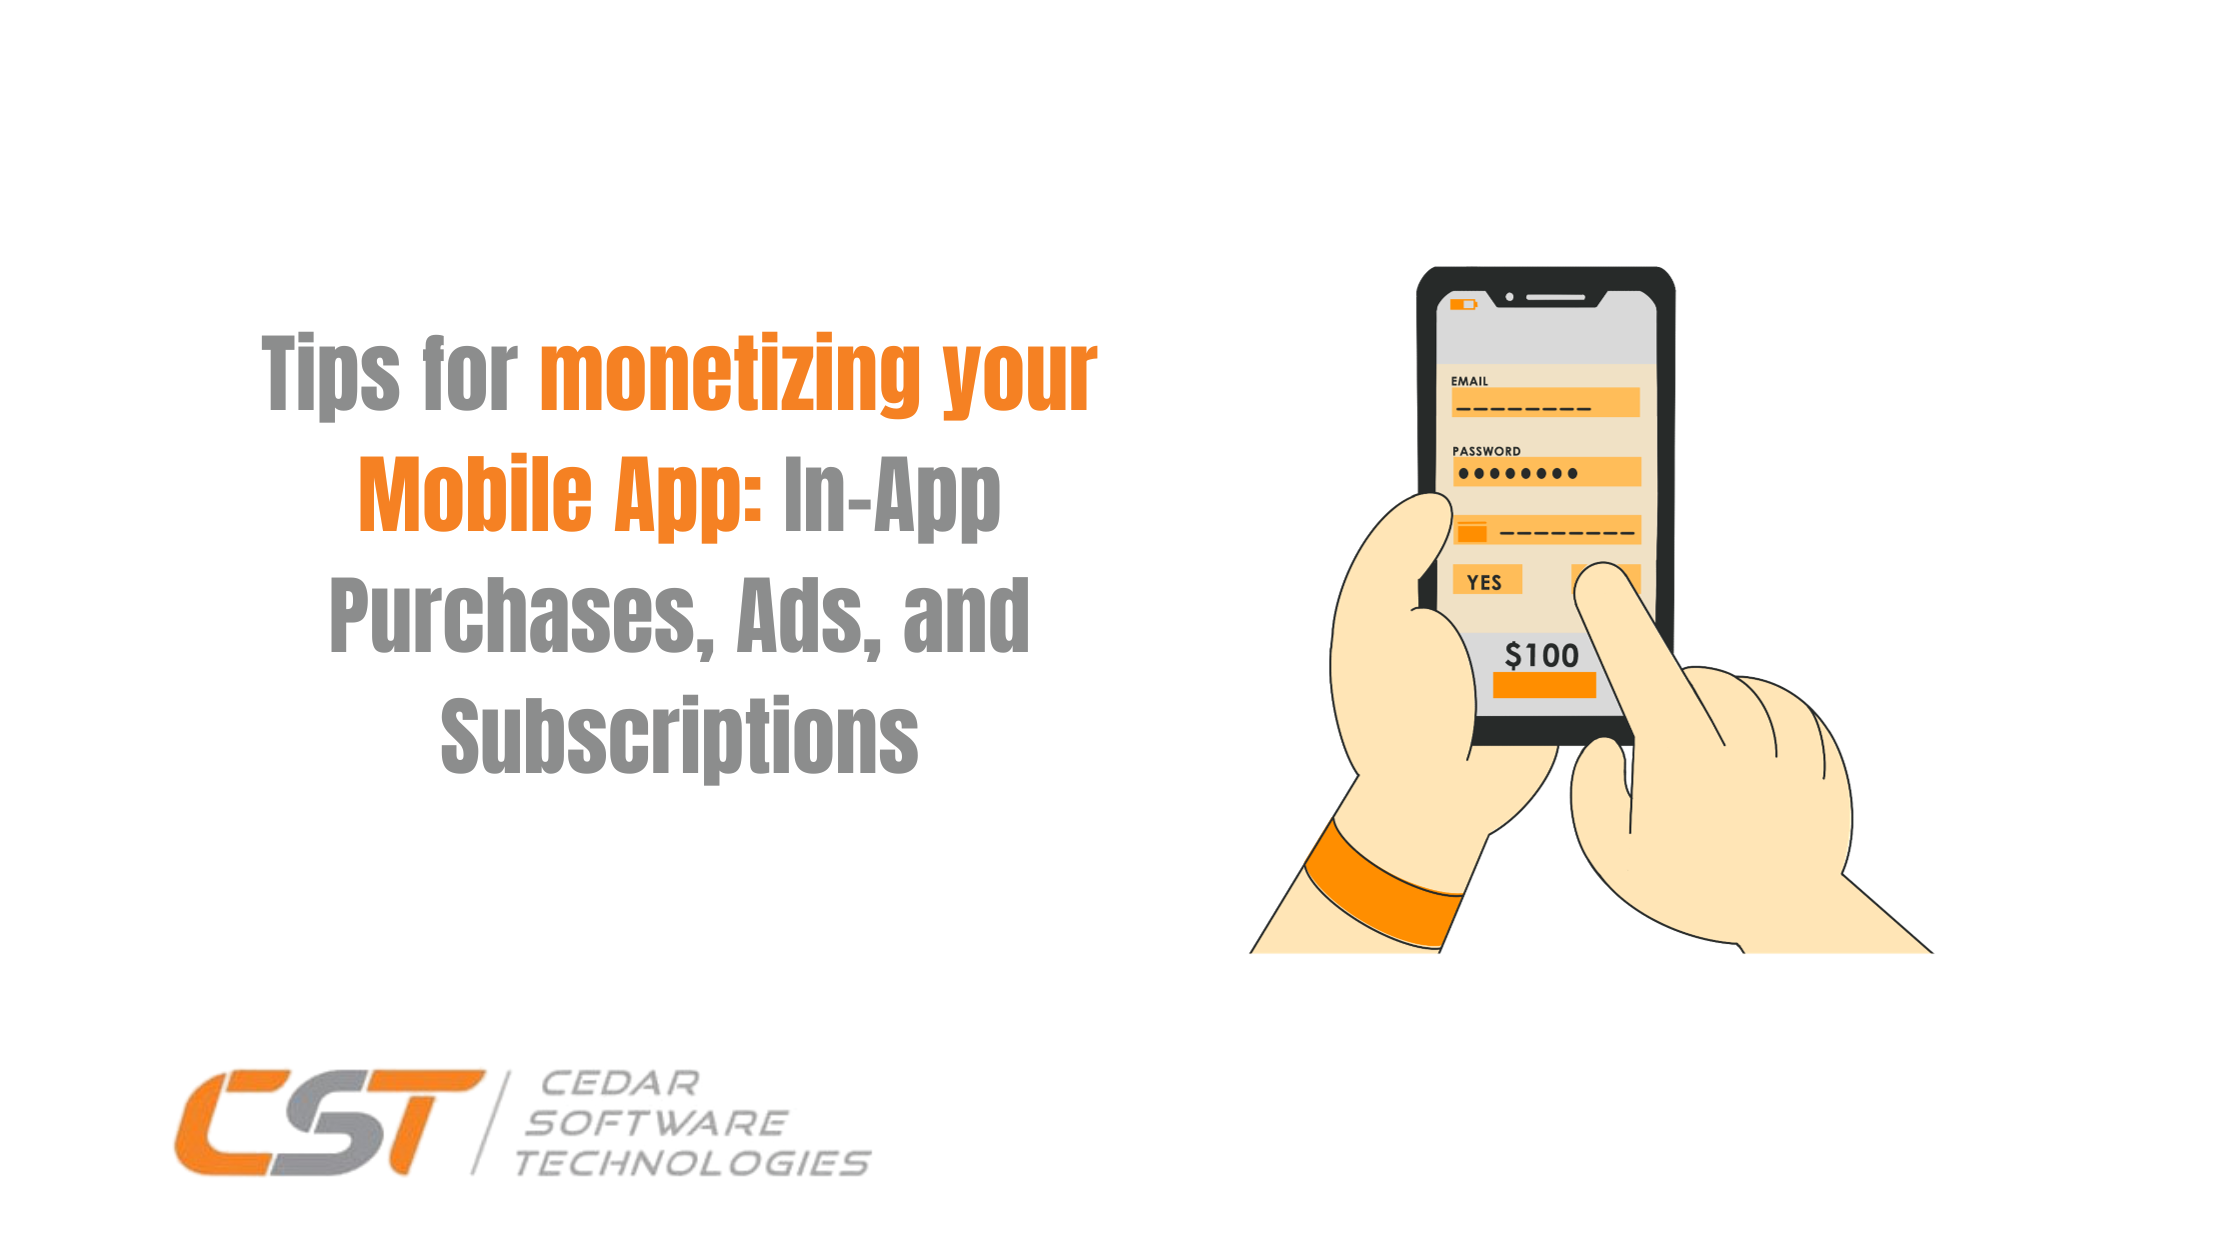 Tips for monetizing your Mobile App: In-App Purchases, Ads, and Subscriptions